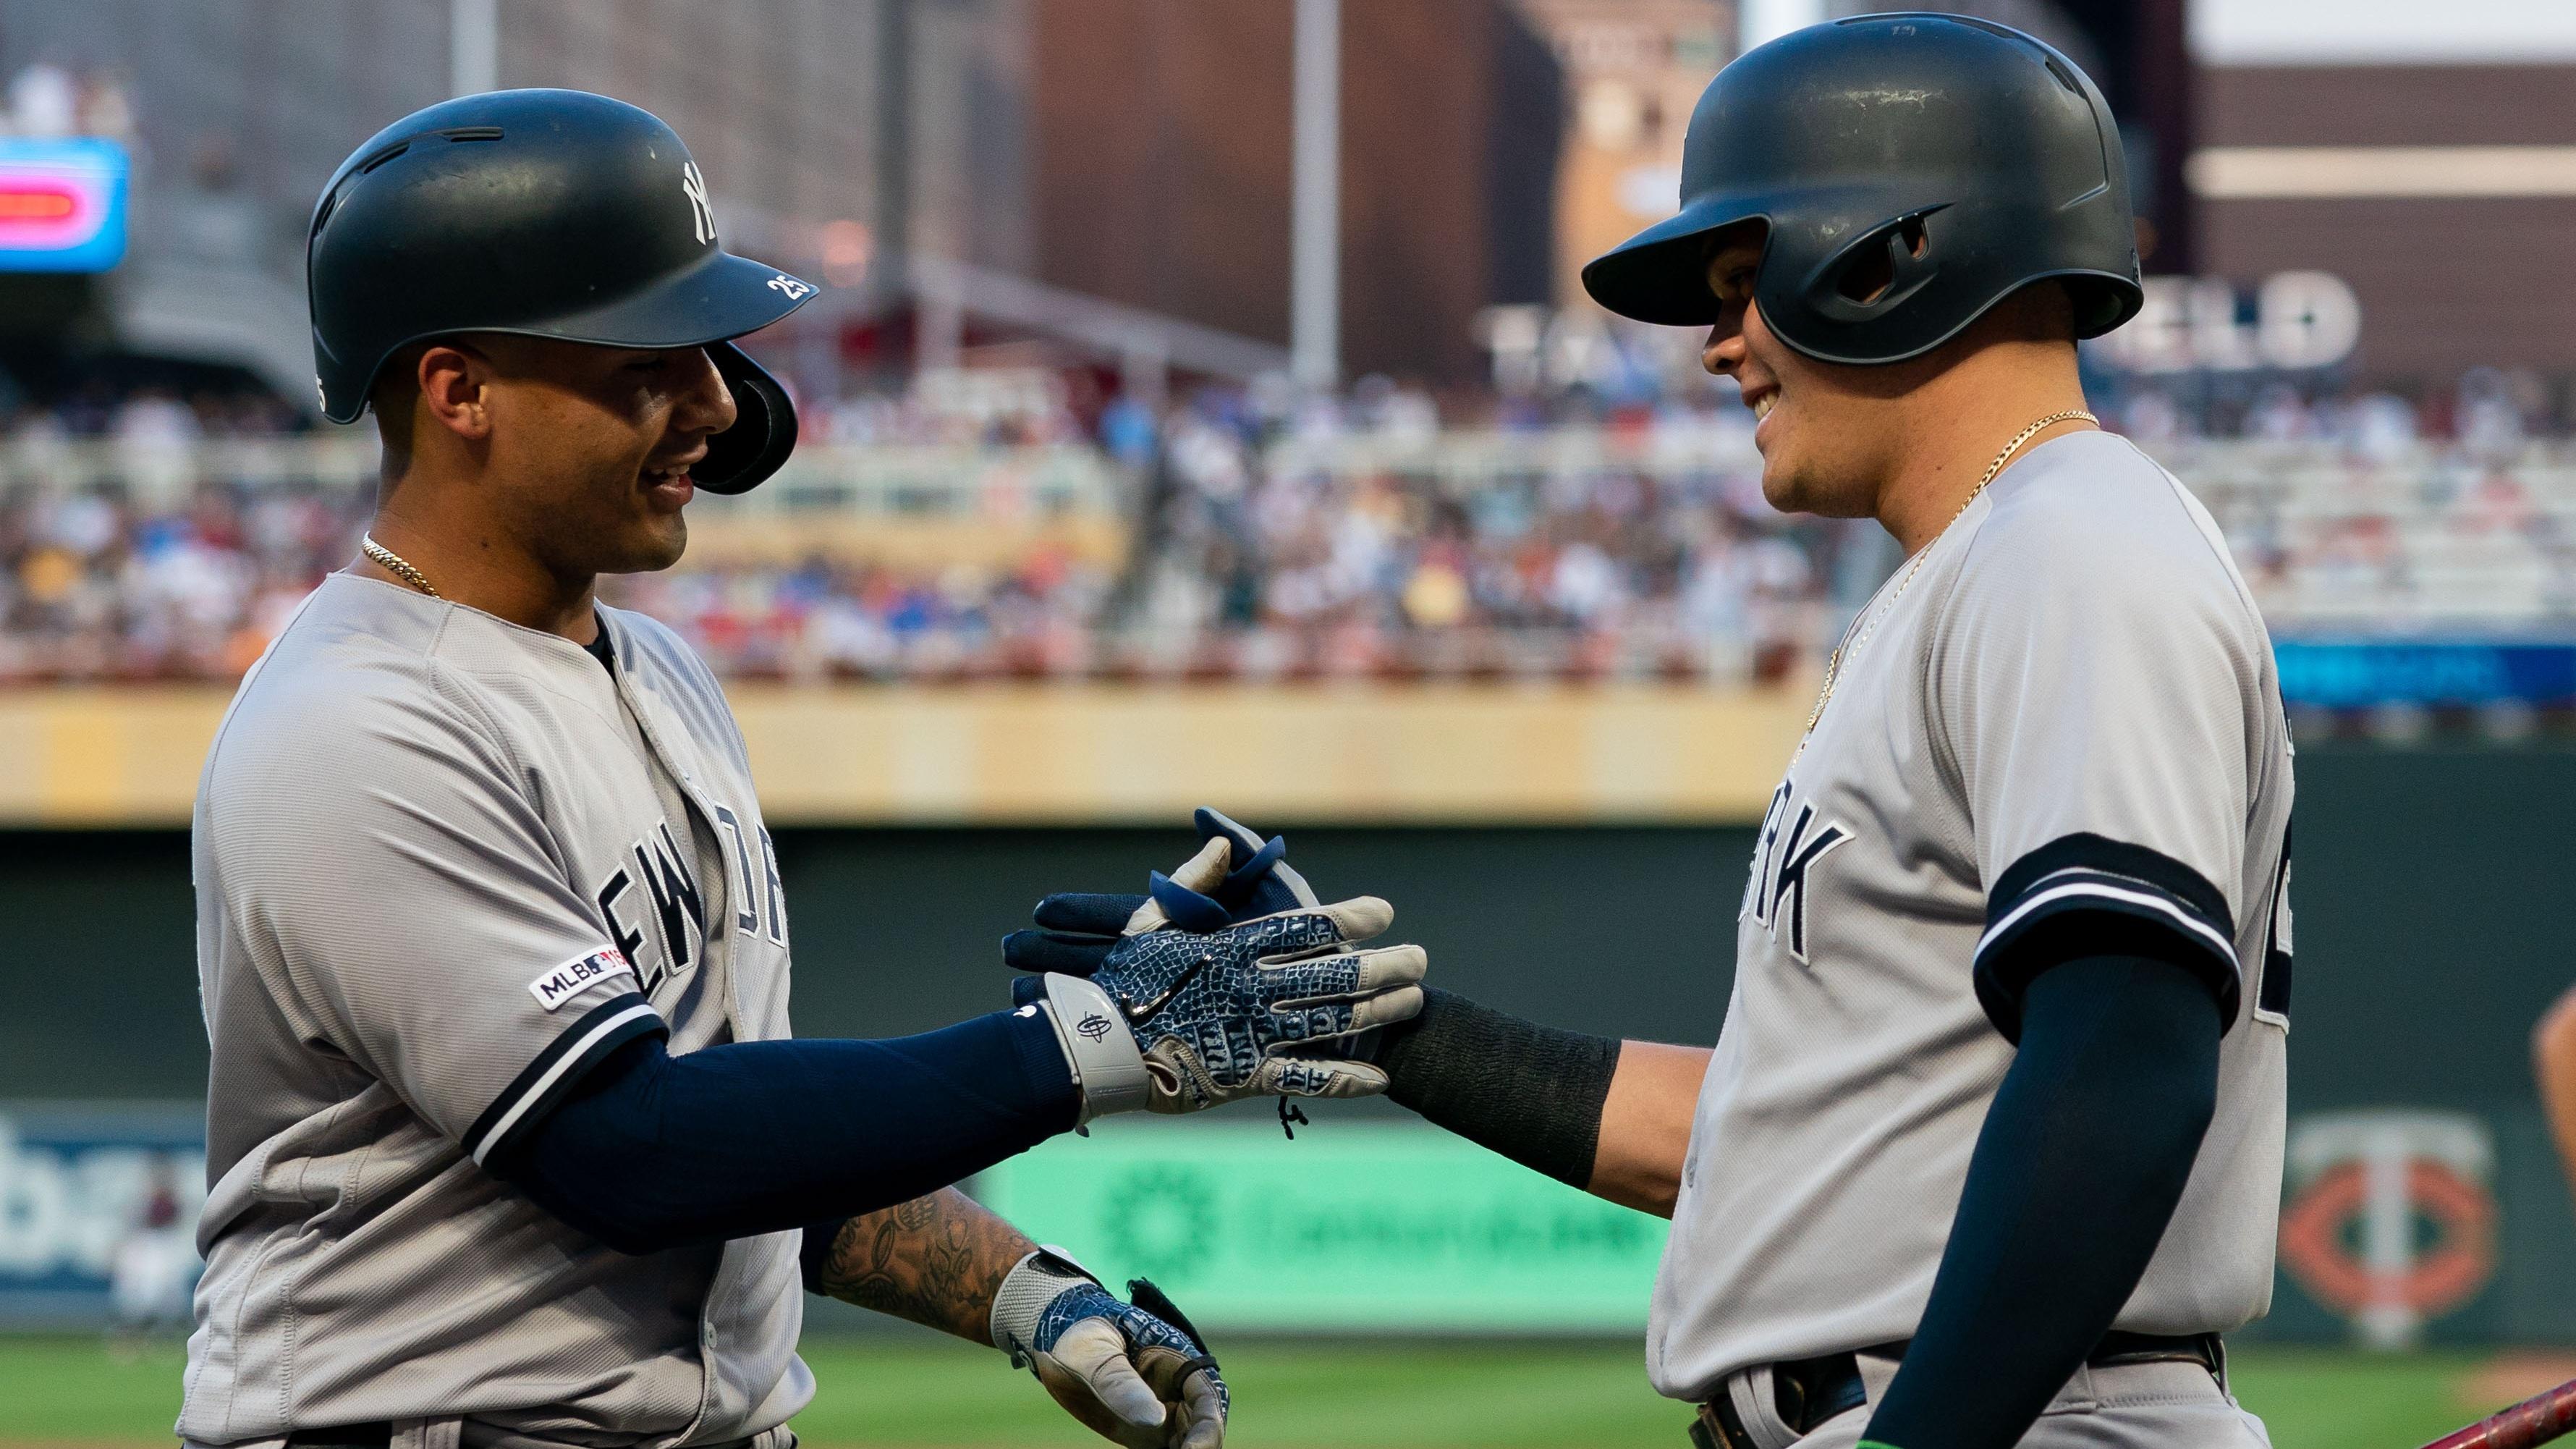 Jul 24, 2019; Minneapolis, MN, USA; New York Yankees second baseman Gleyber Torres (25) celebrates after hitting a home run with third baseman Gio Urshela (right) in the third inning against Minnesota Twins at Target Field. Mandatory Credit: Brad Rempel-USA TODAY Sports / © Brad Rempel-USA TODAY Sports